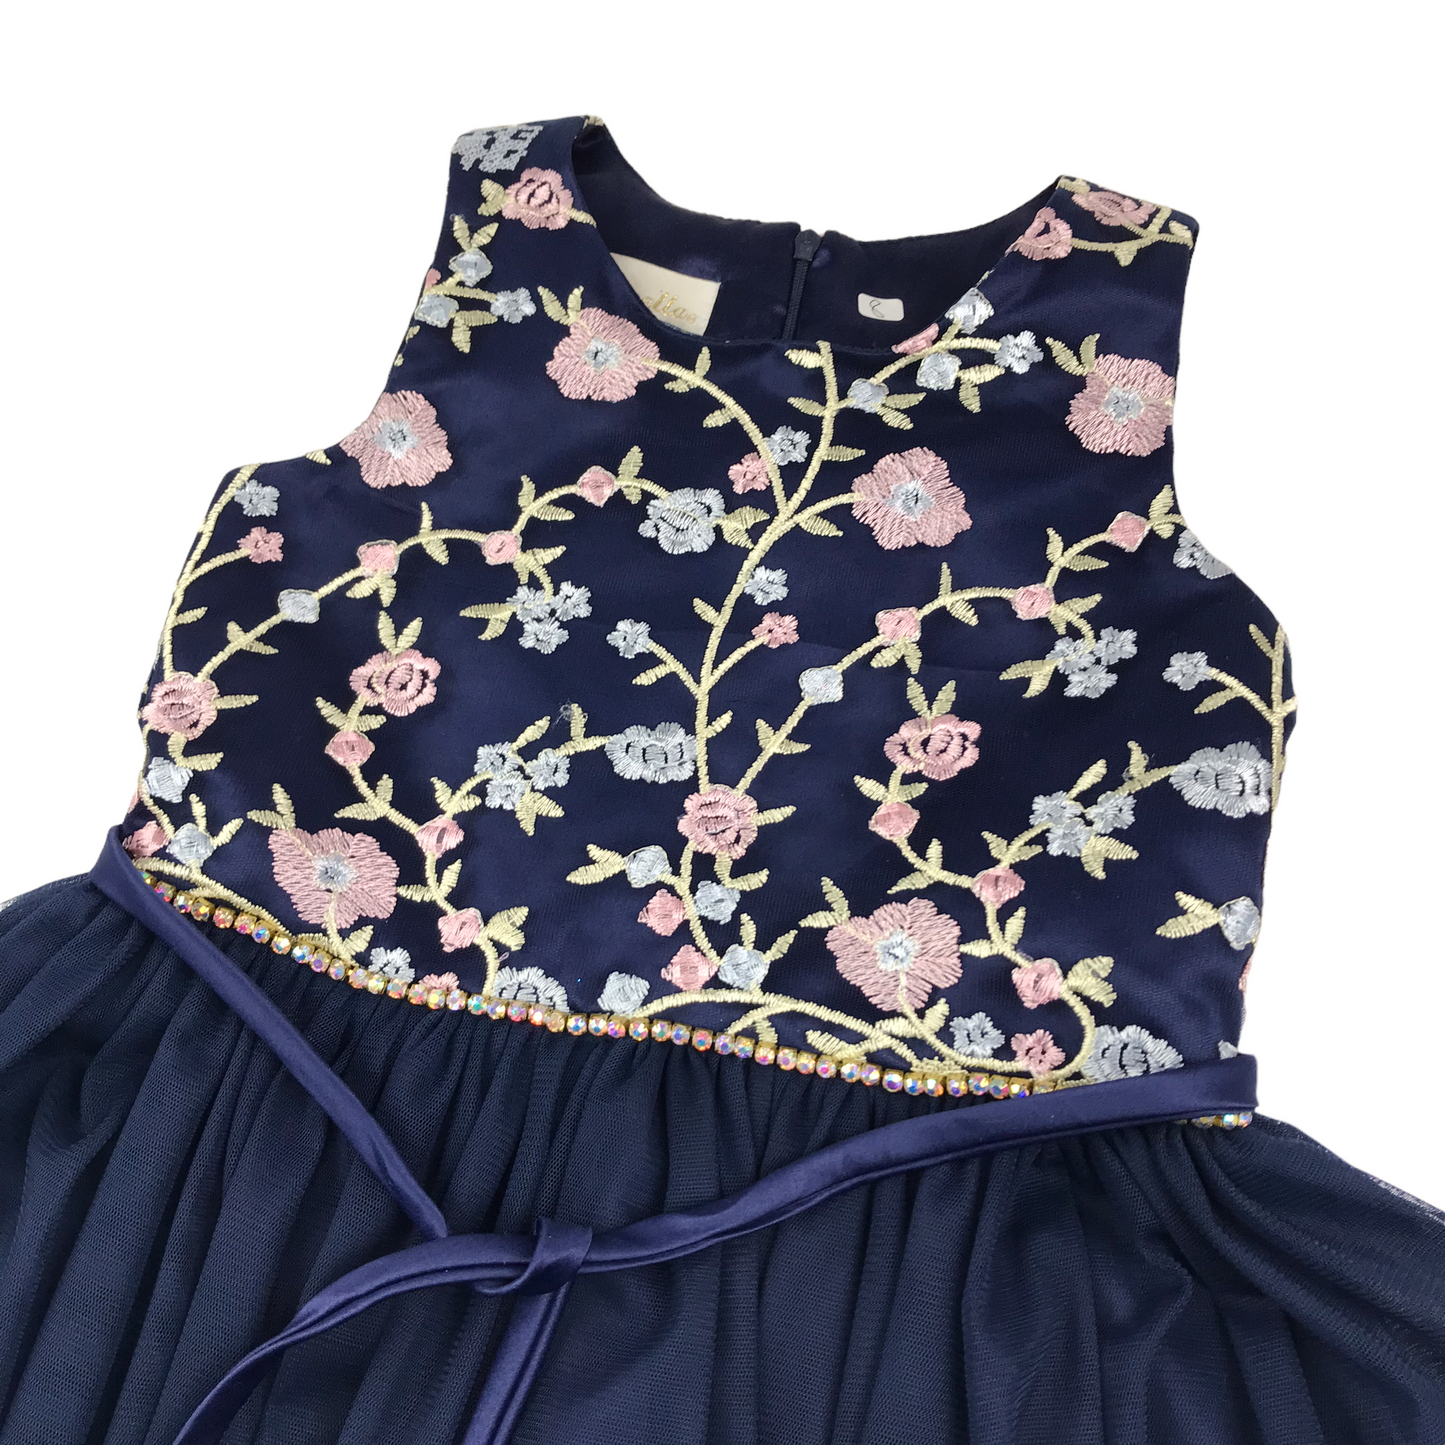 Cinderella Navy Blue Floral Embroidery Tulle Dress Age 8